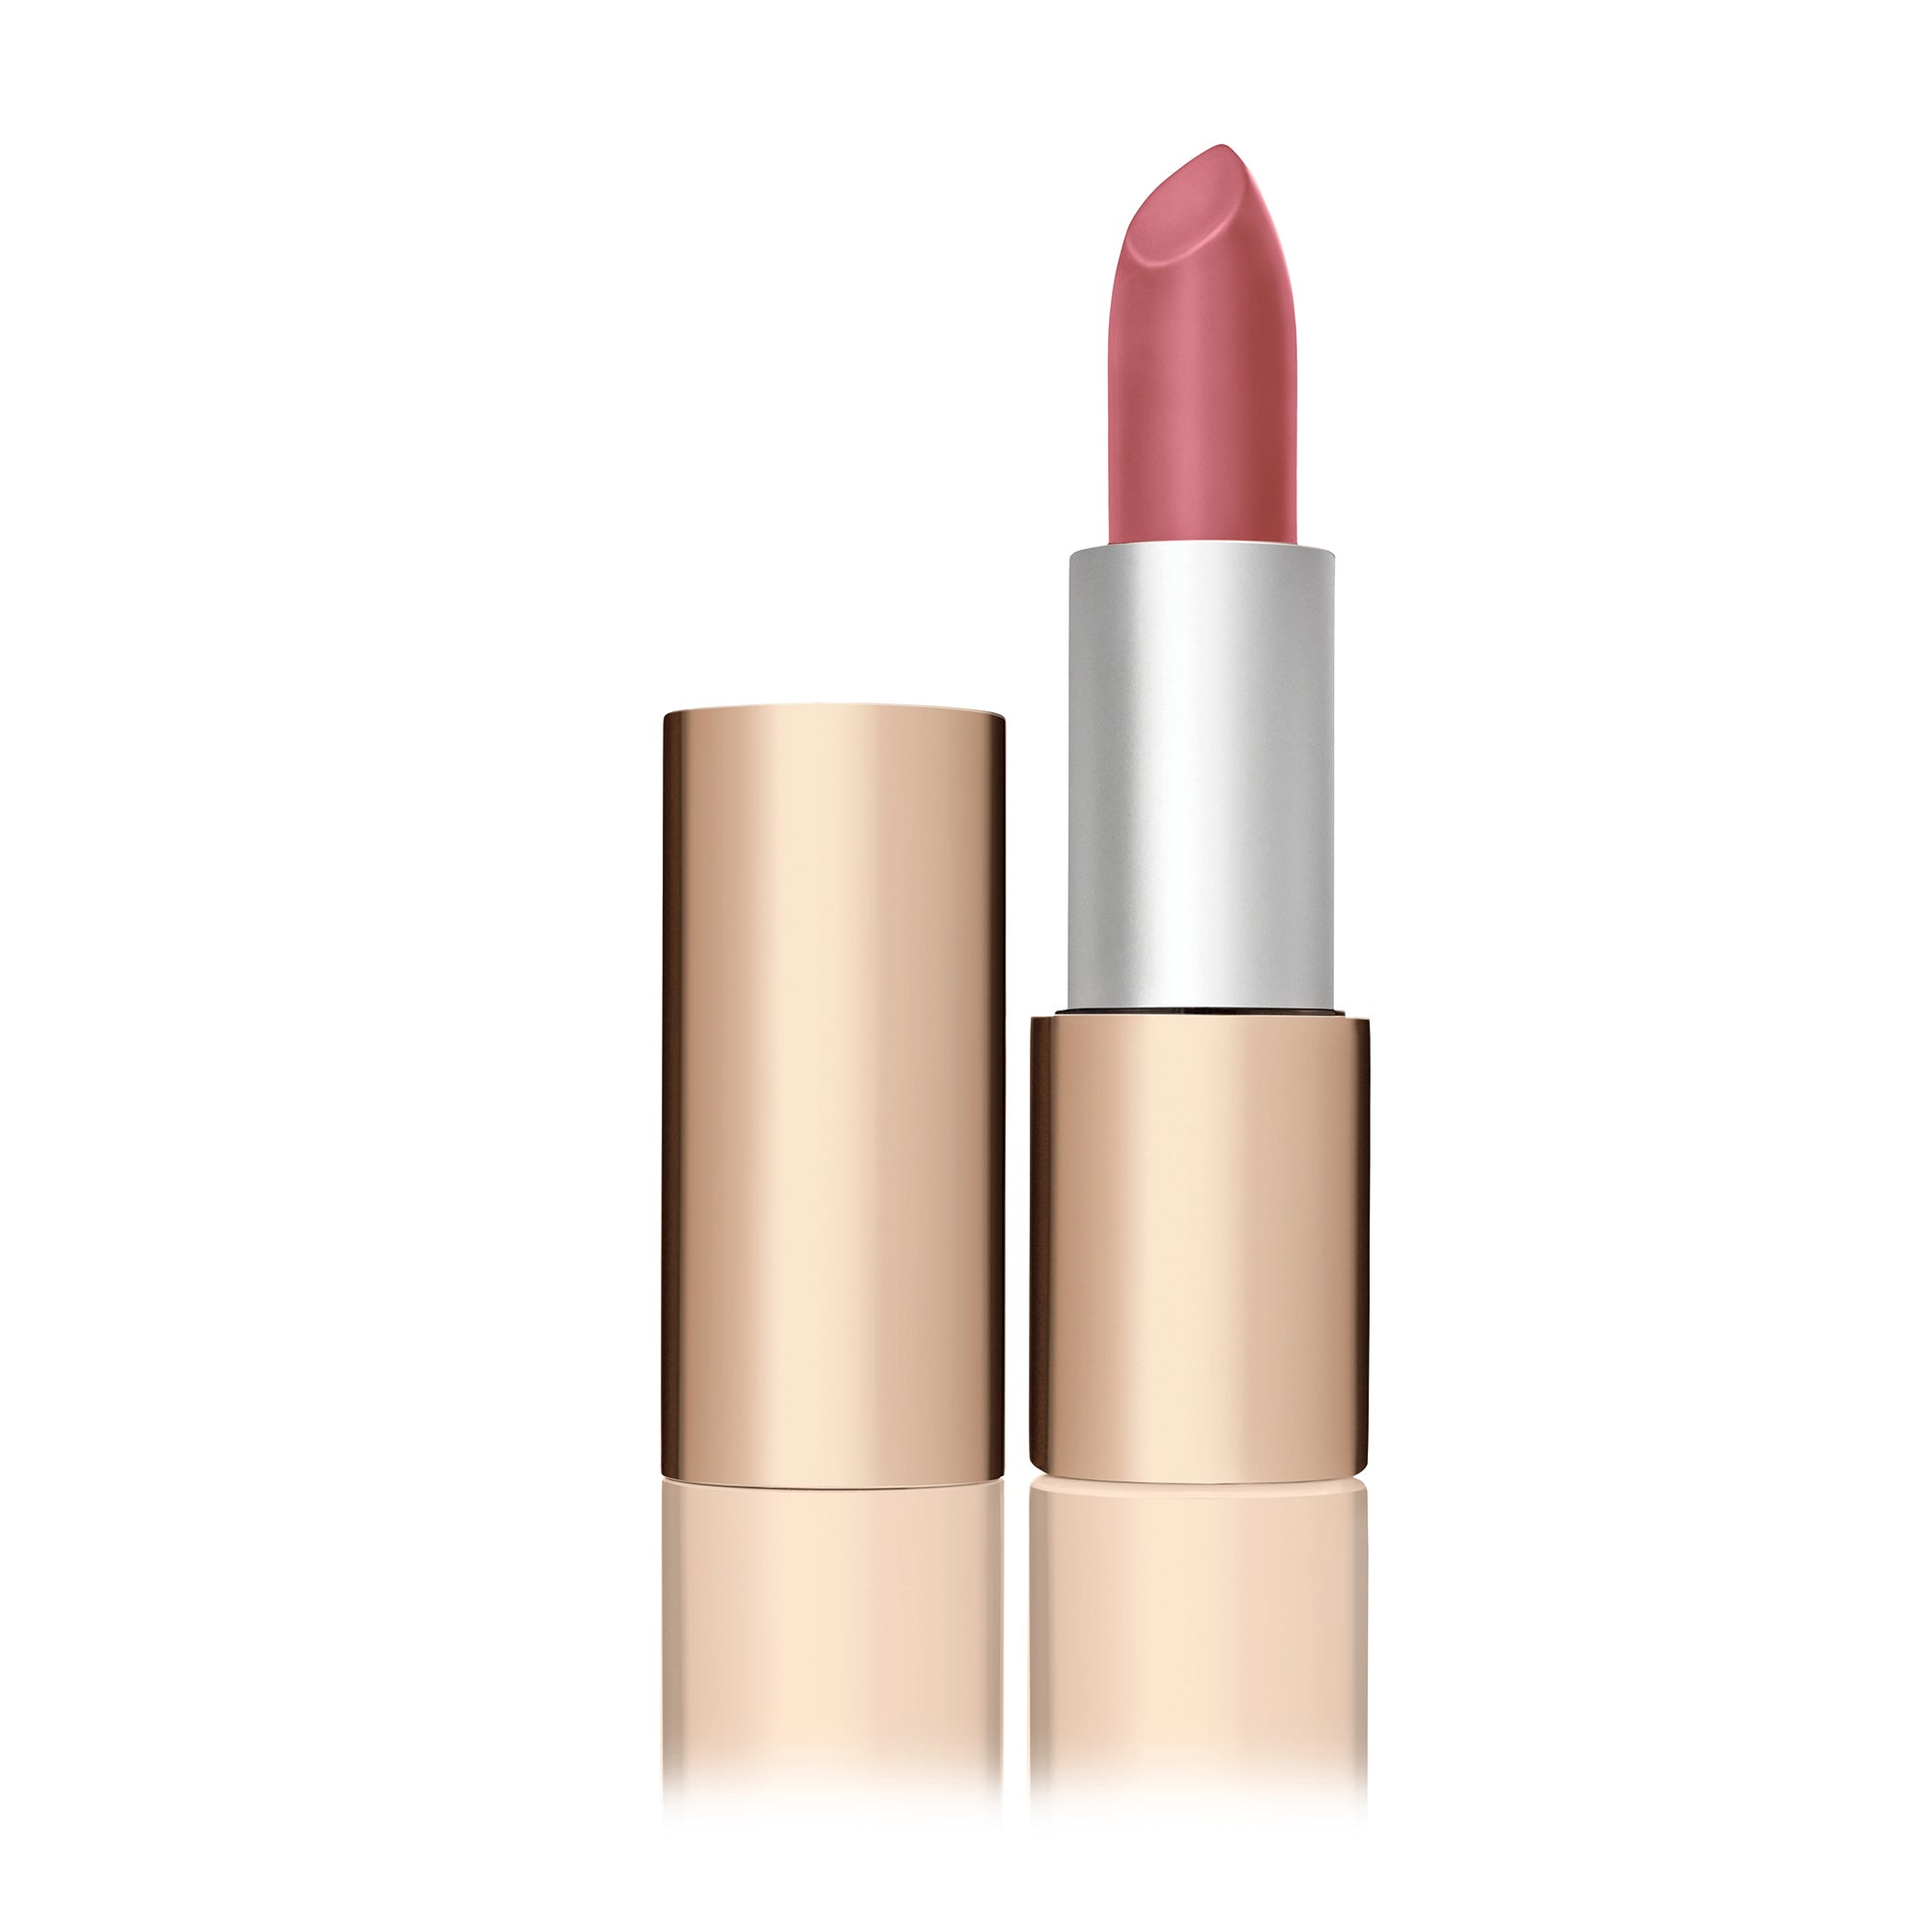 Jane Iredale Triple Luxe Long Lasting Naturally Moist Lipstick / TANIA